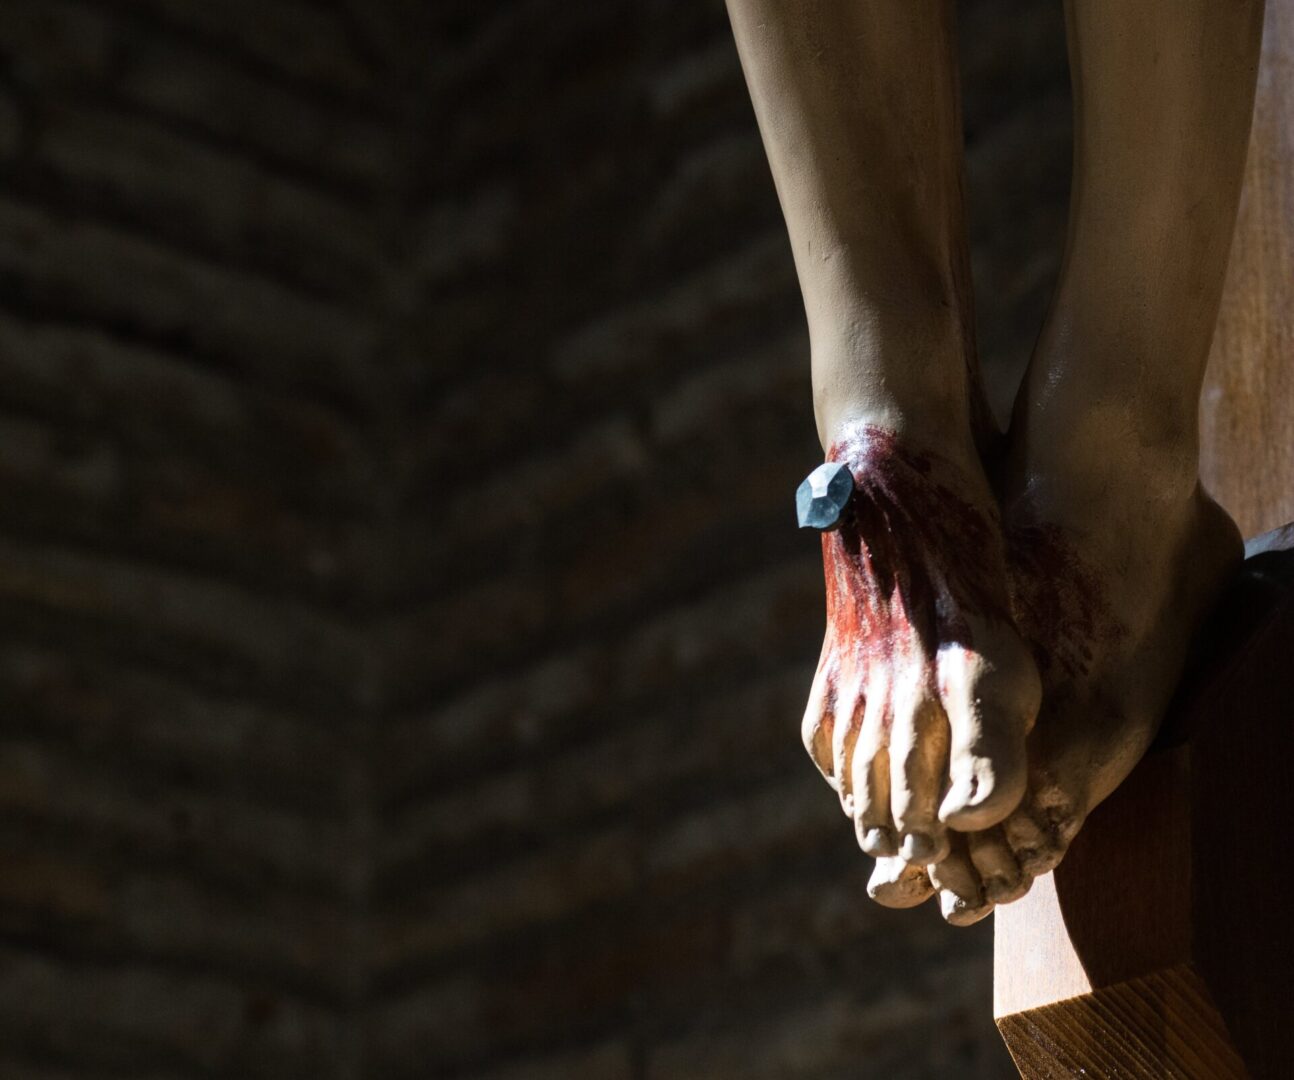 Feet shot of Jesus, crucified with a nail